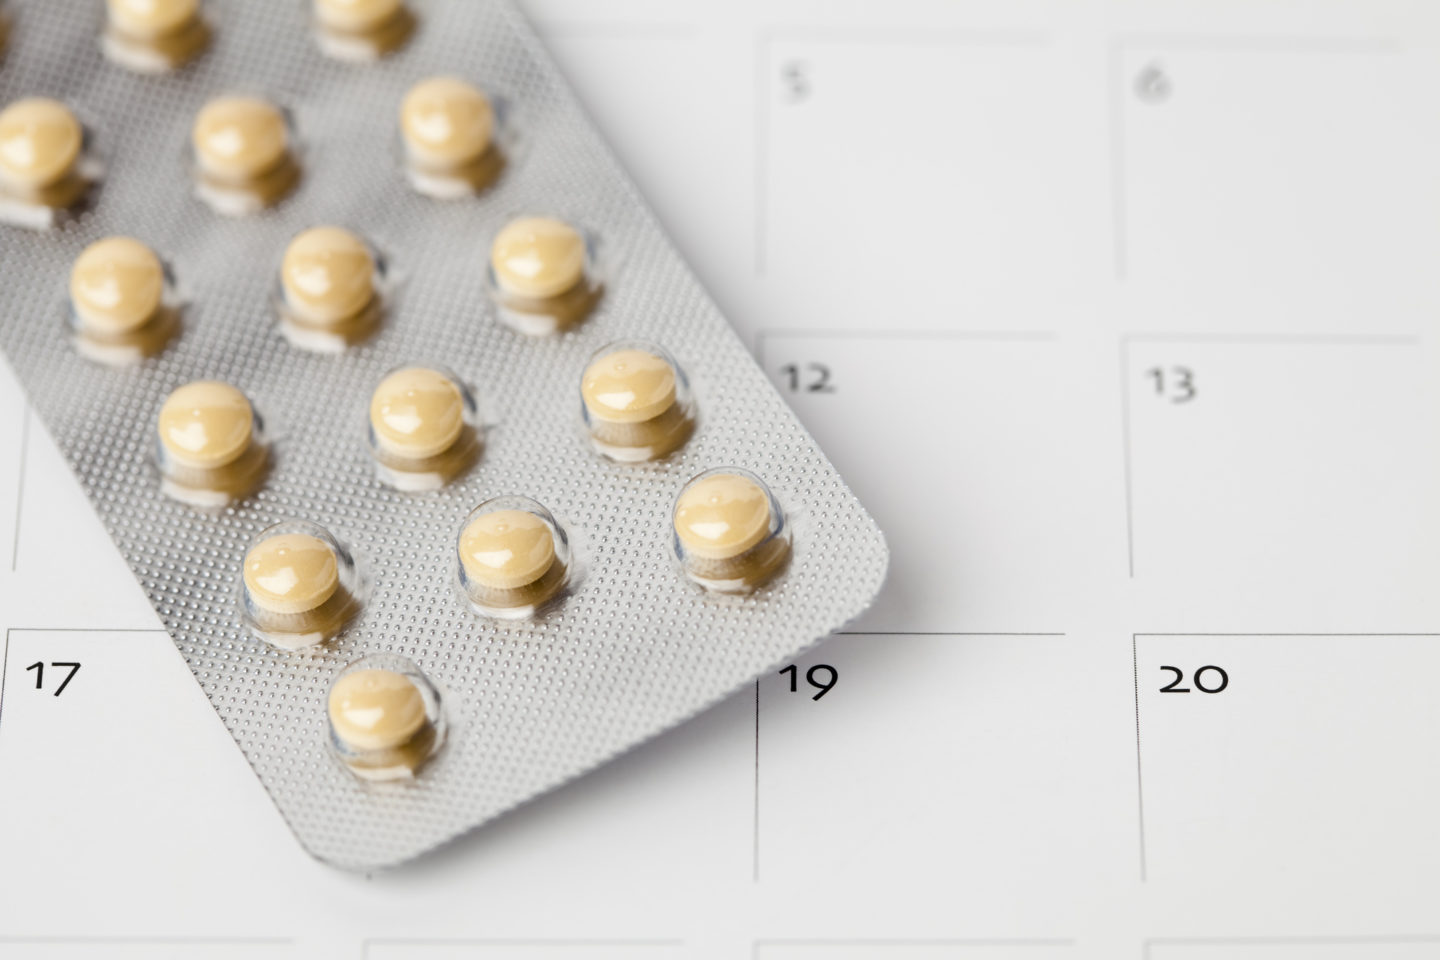 One Step Closer To Birth Control For Men